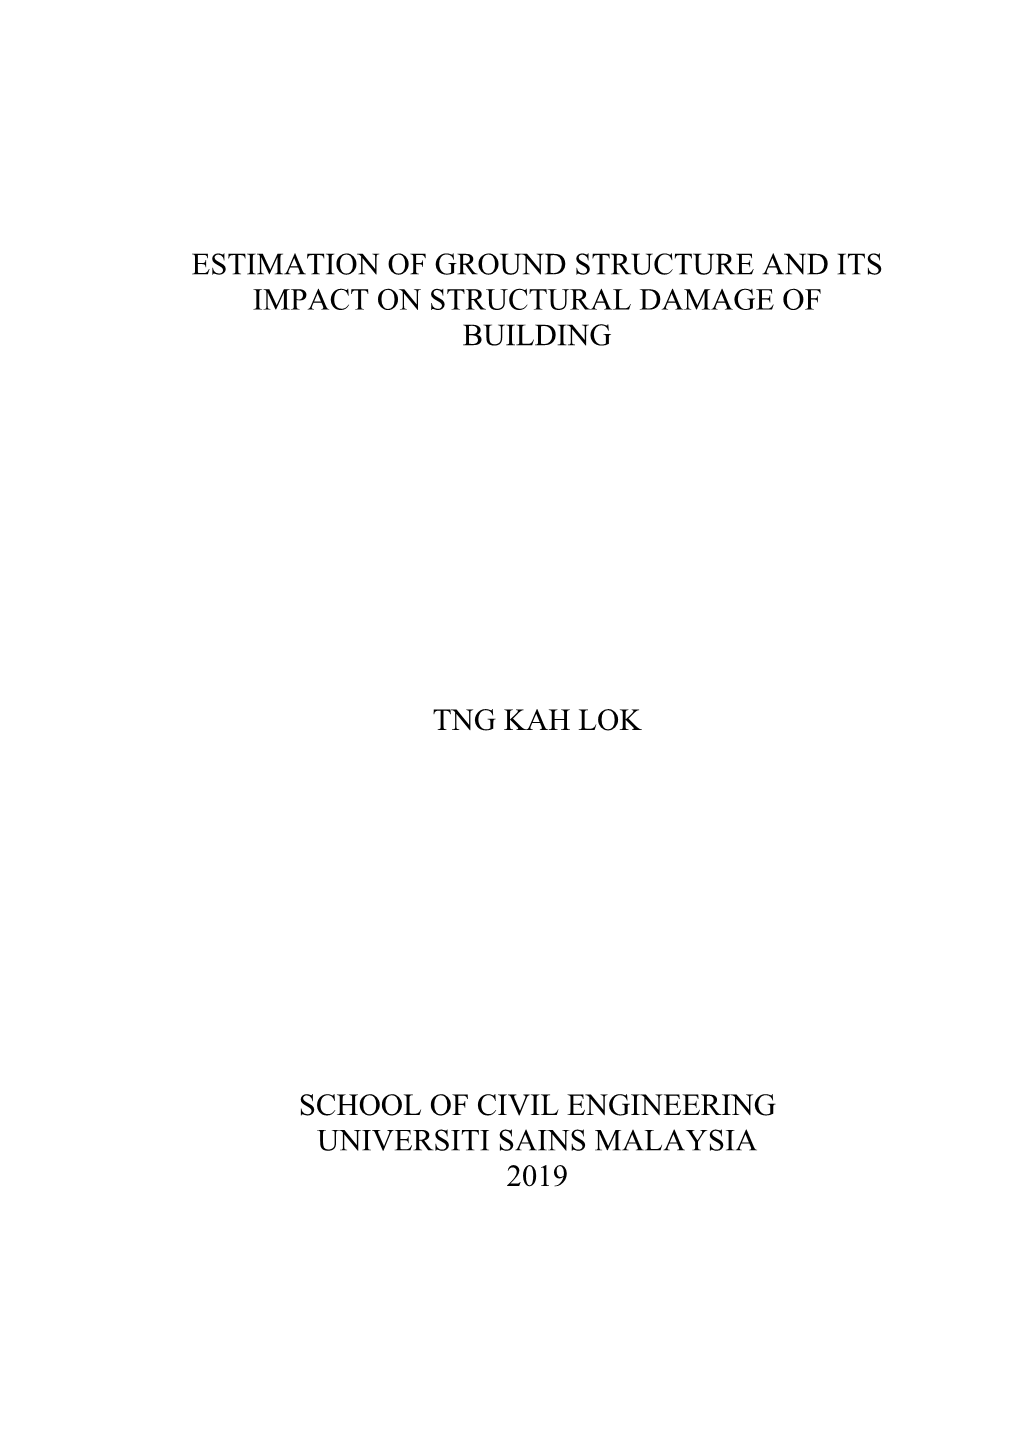 Estimation of Ground Structure and Its Impact on Structural Damage of Building